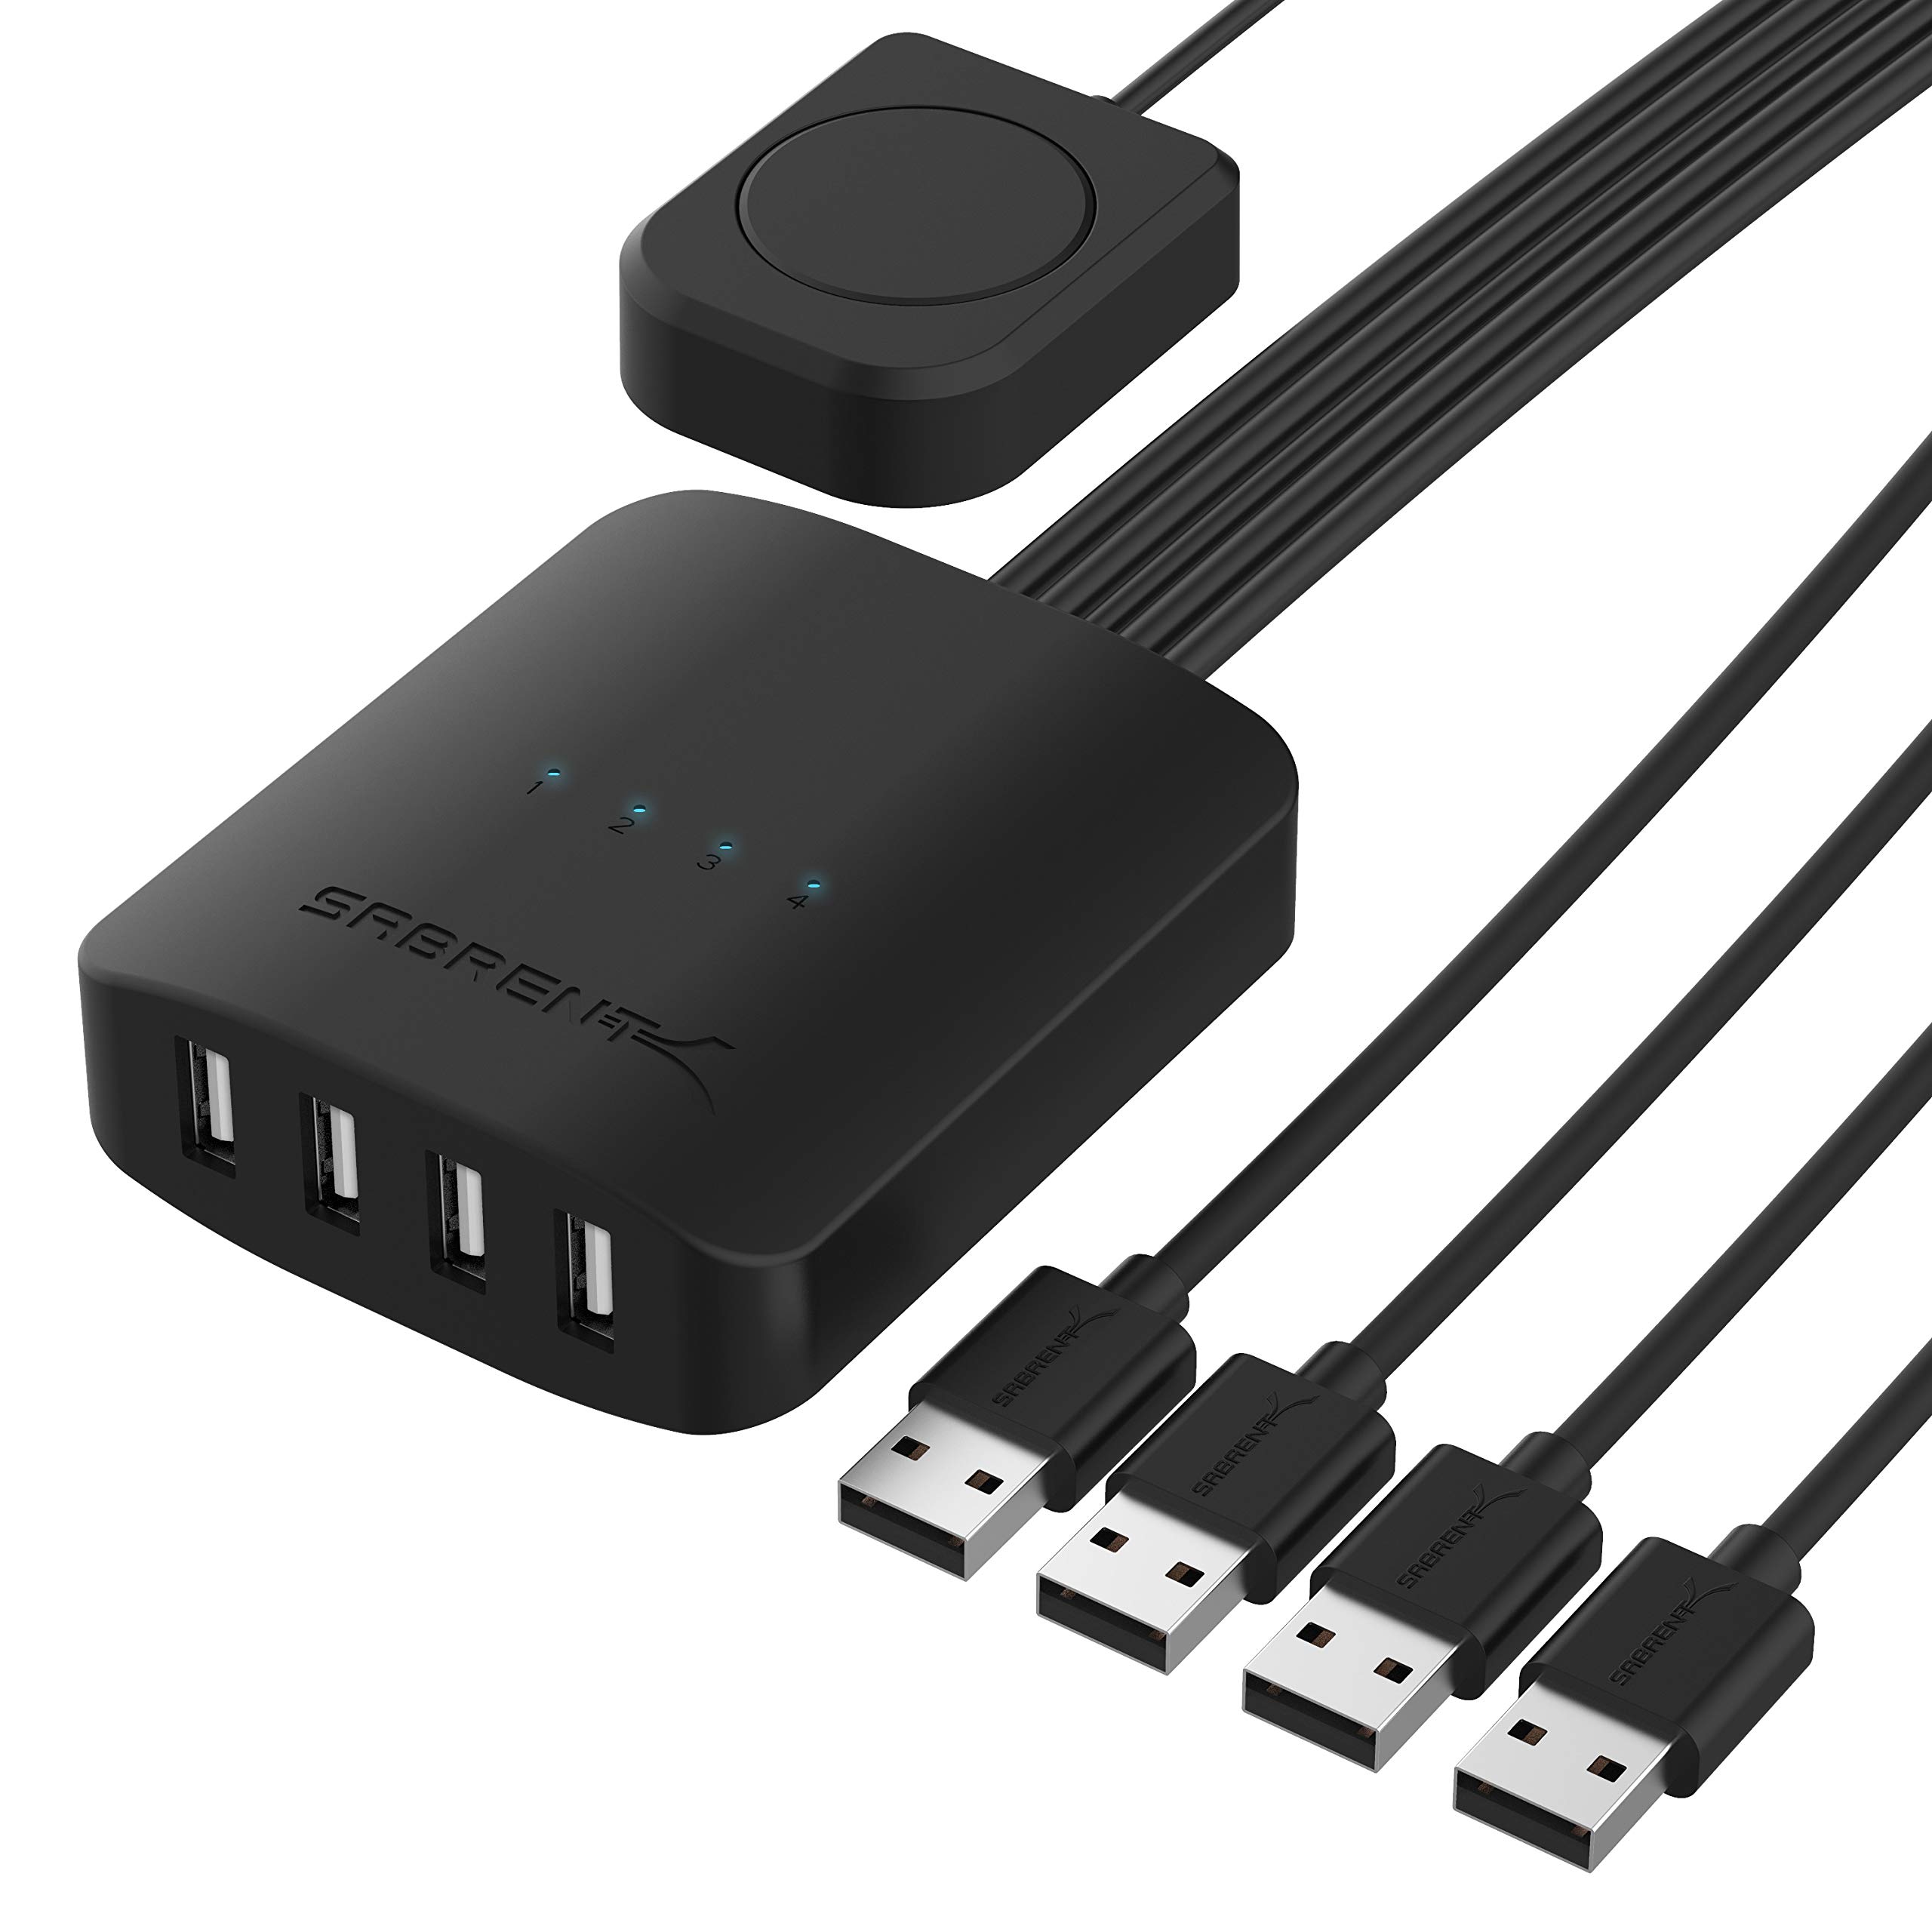 SABRENT USB 2.0 Sharing Switch up to 4 Computers and Peripherals LED Device Indicators (USB-USS4)